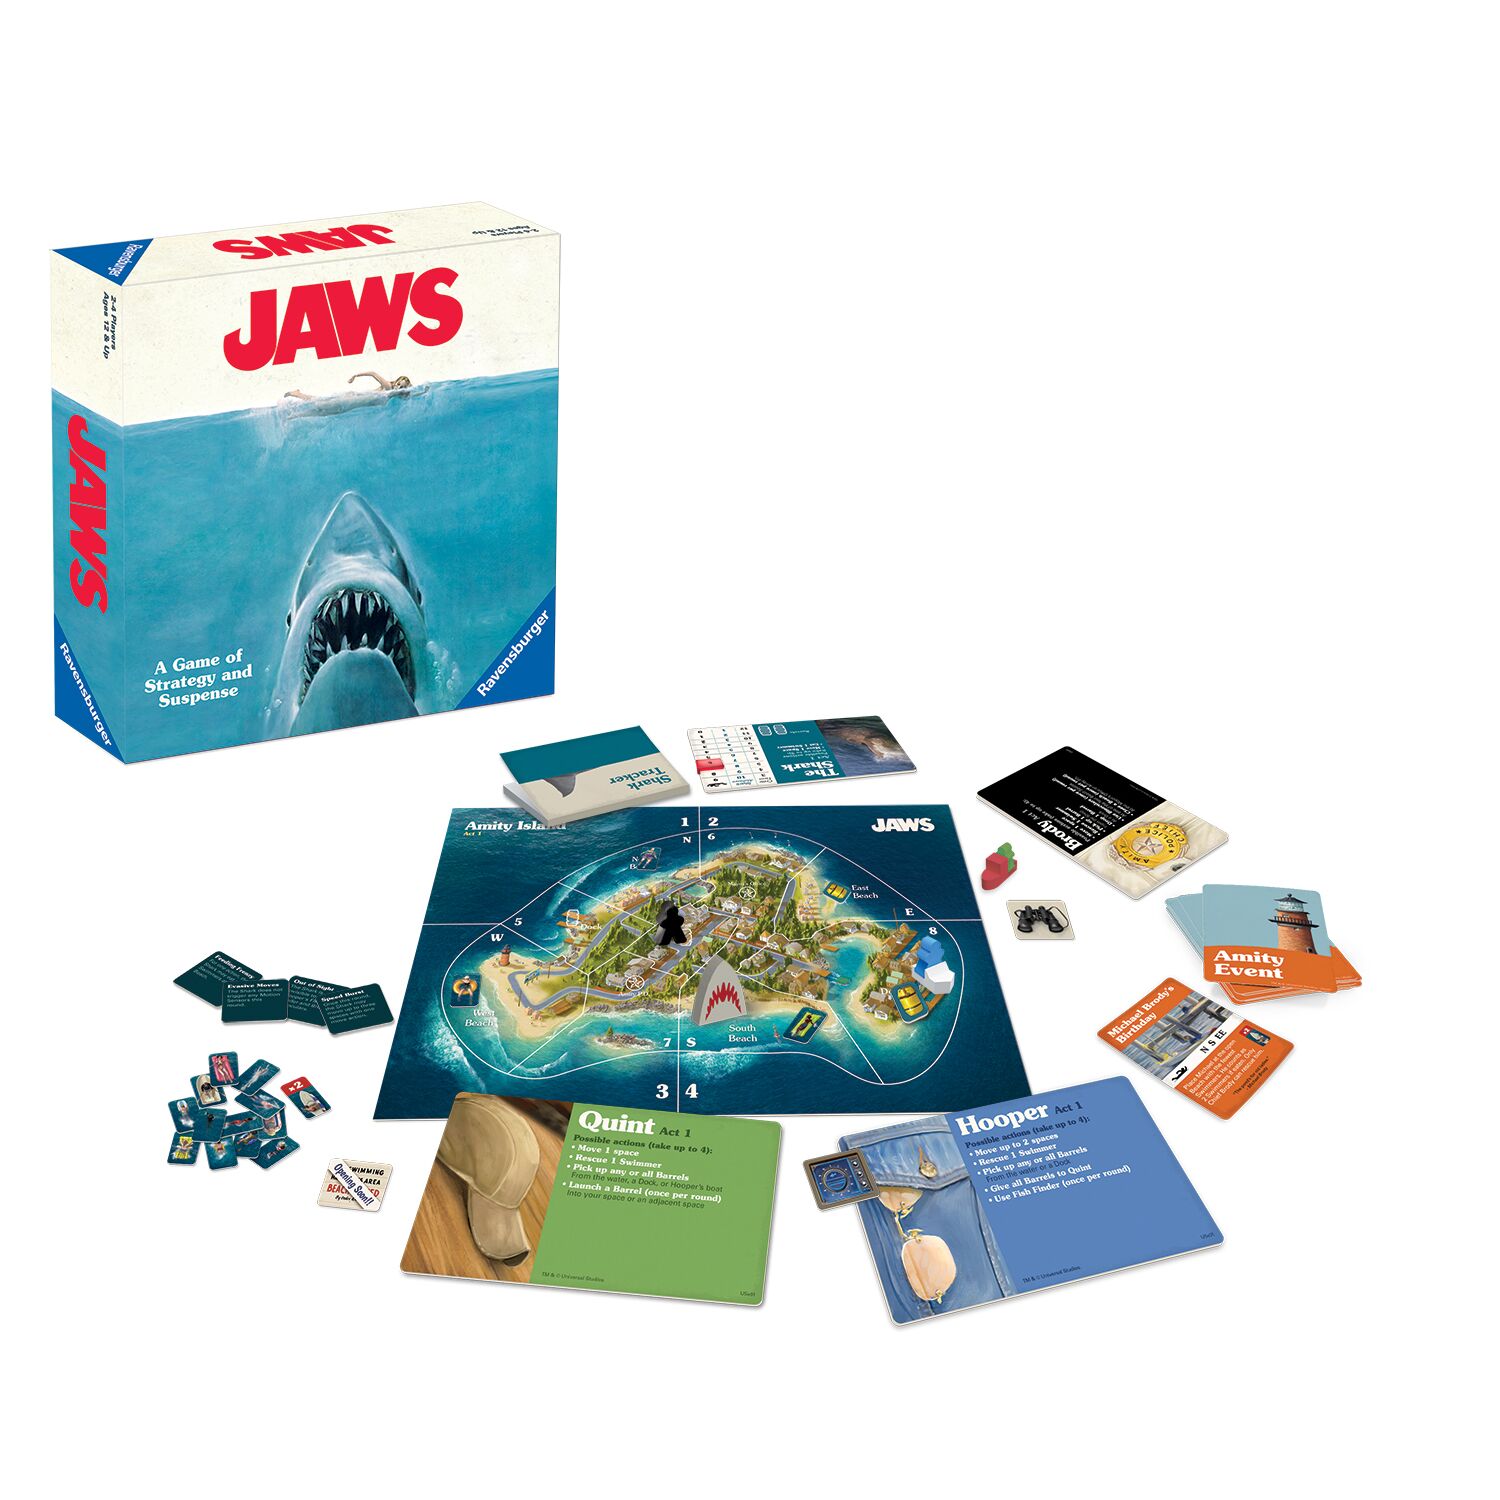 JAWS: A Game of Strategy and Suspense